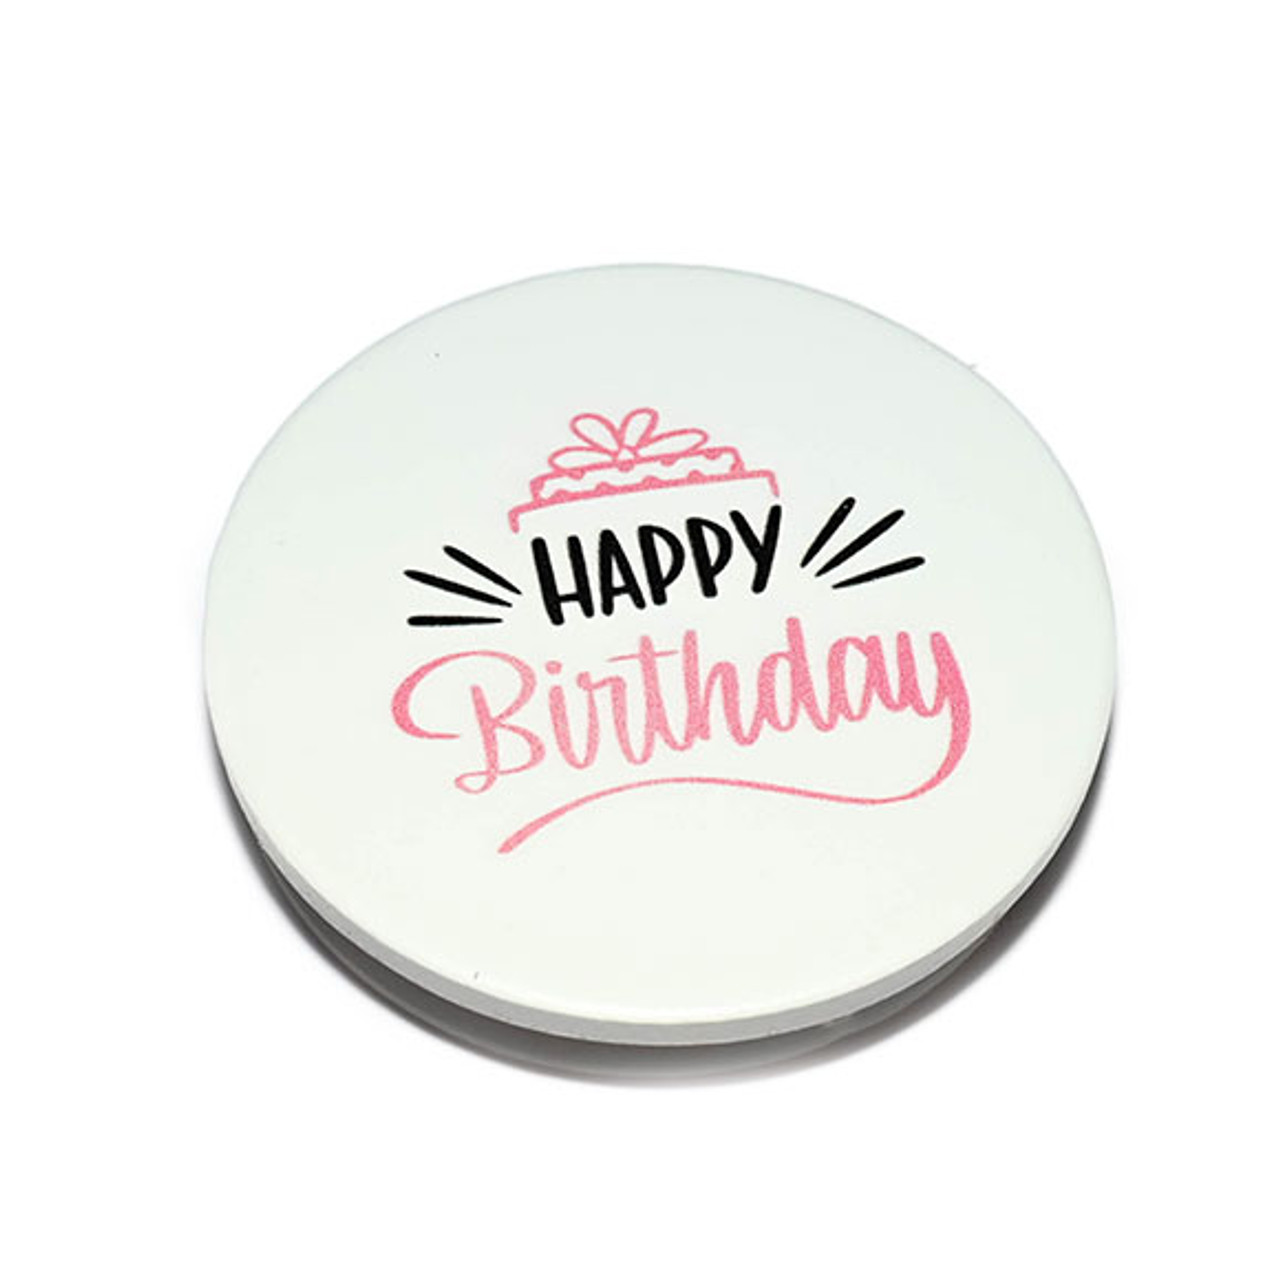 https://cdn11.bigcommerce.com/s-znjh1s2dil/images/stencil/1280w/products/804/1355/Happy-Birthday-Lid__16521.1703792756.jpg